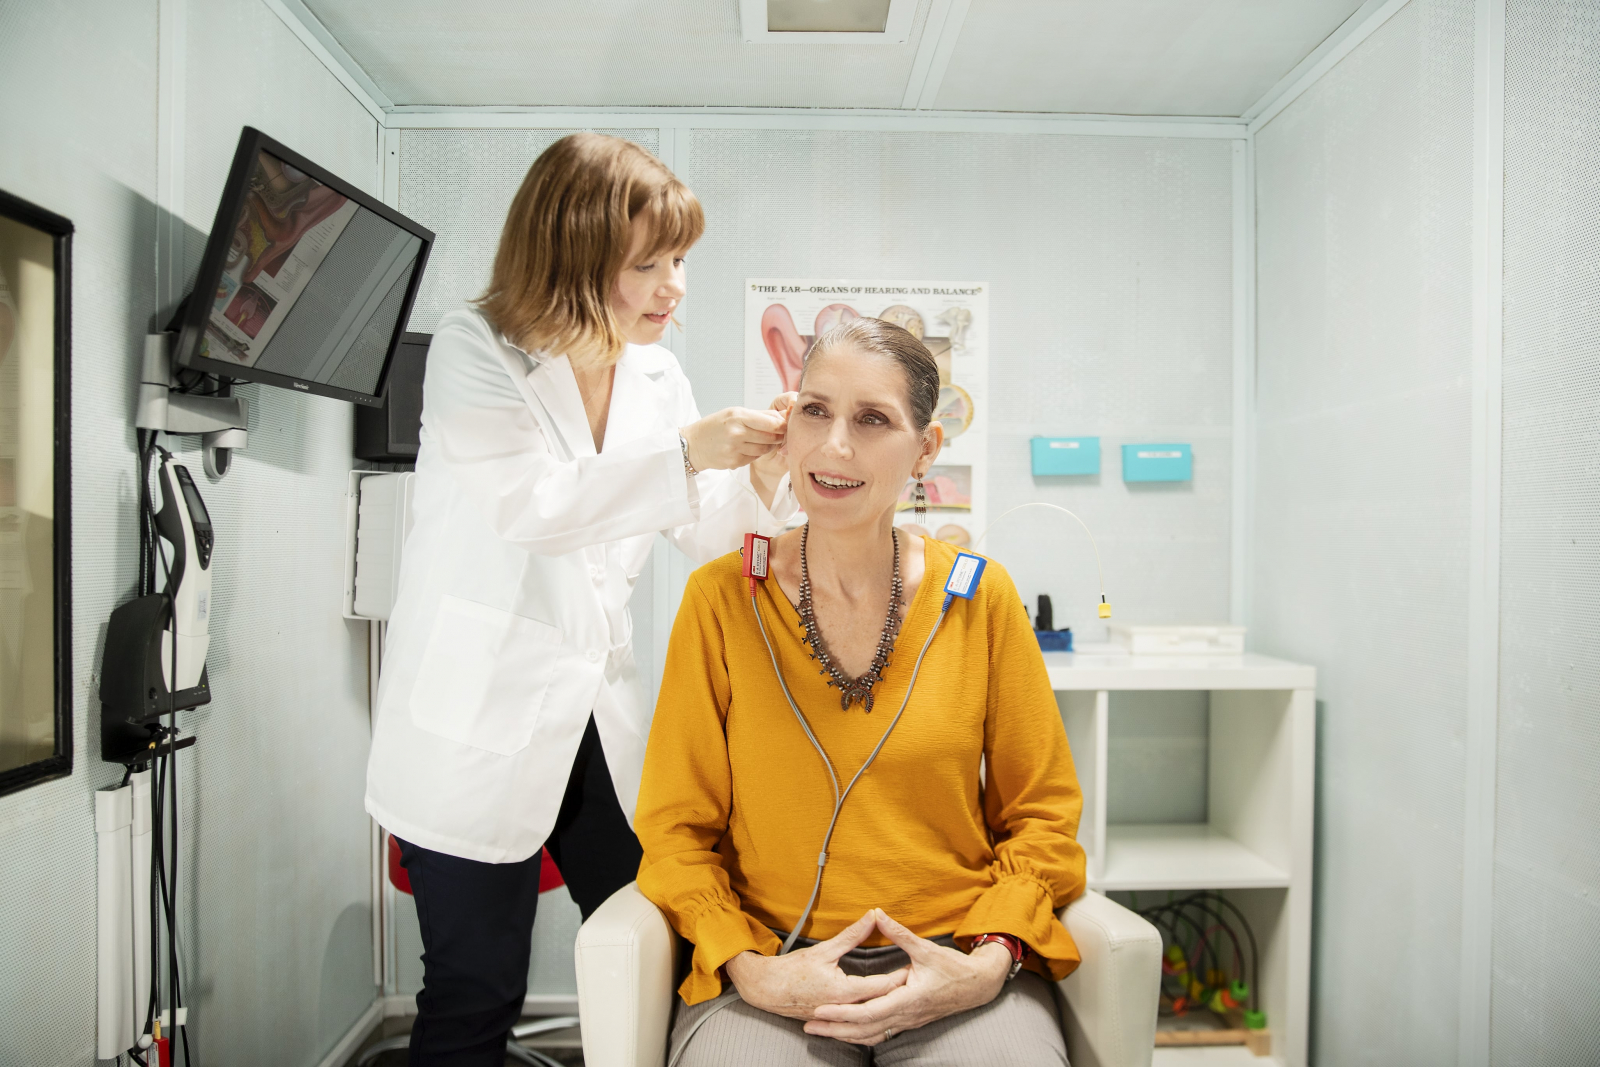 A woman receives a hearing exam in a hearing test booth.